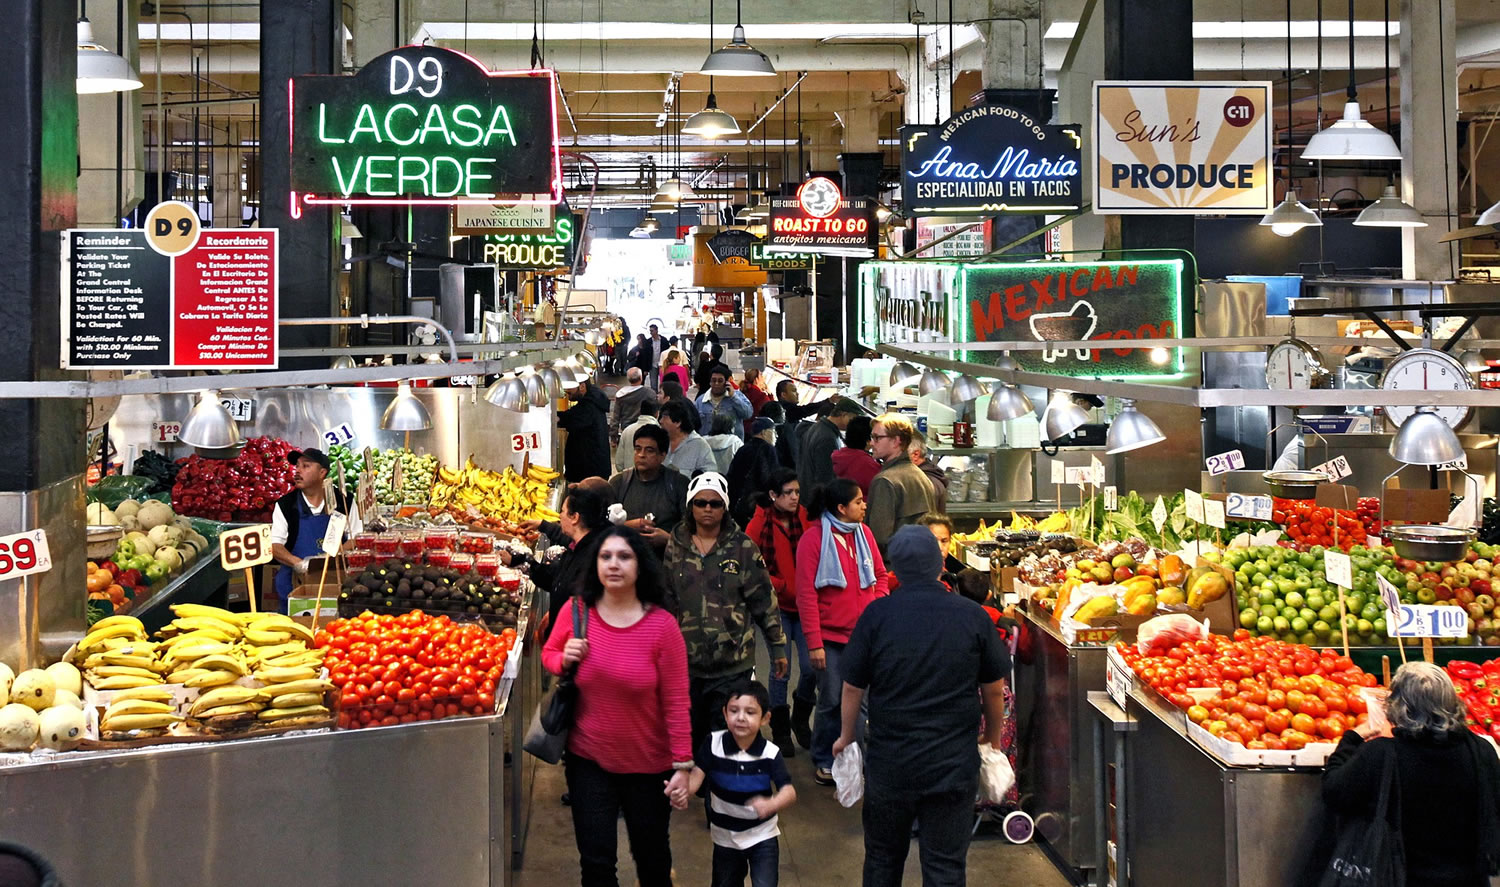 The Grand Central Market in downtown Los Angeles. A bustling downtown landmark that saw its glory days nearly a century ago is hoping to recover some of its fashionable luster as the gritty neighborhood gentrifies.